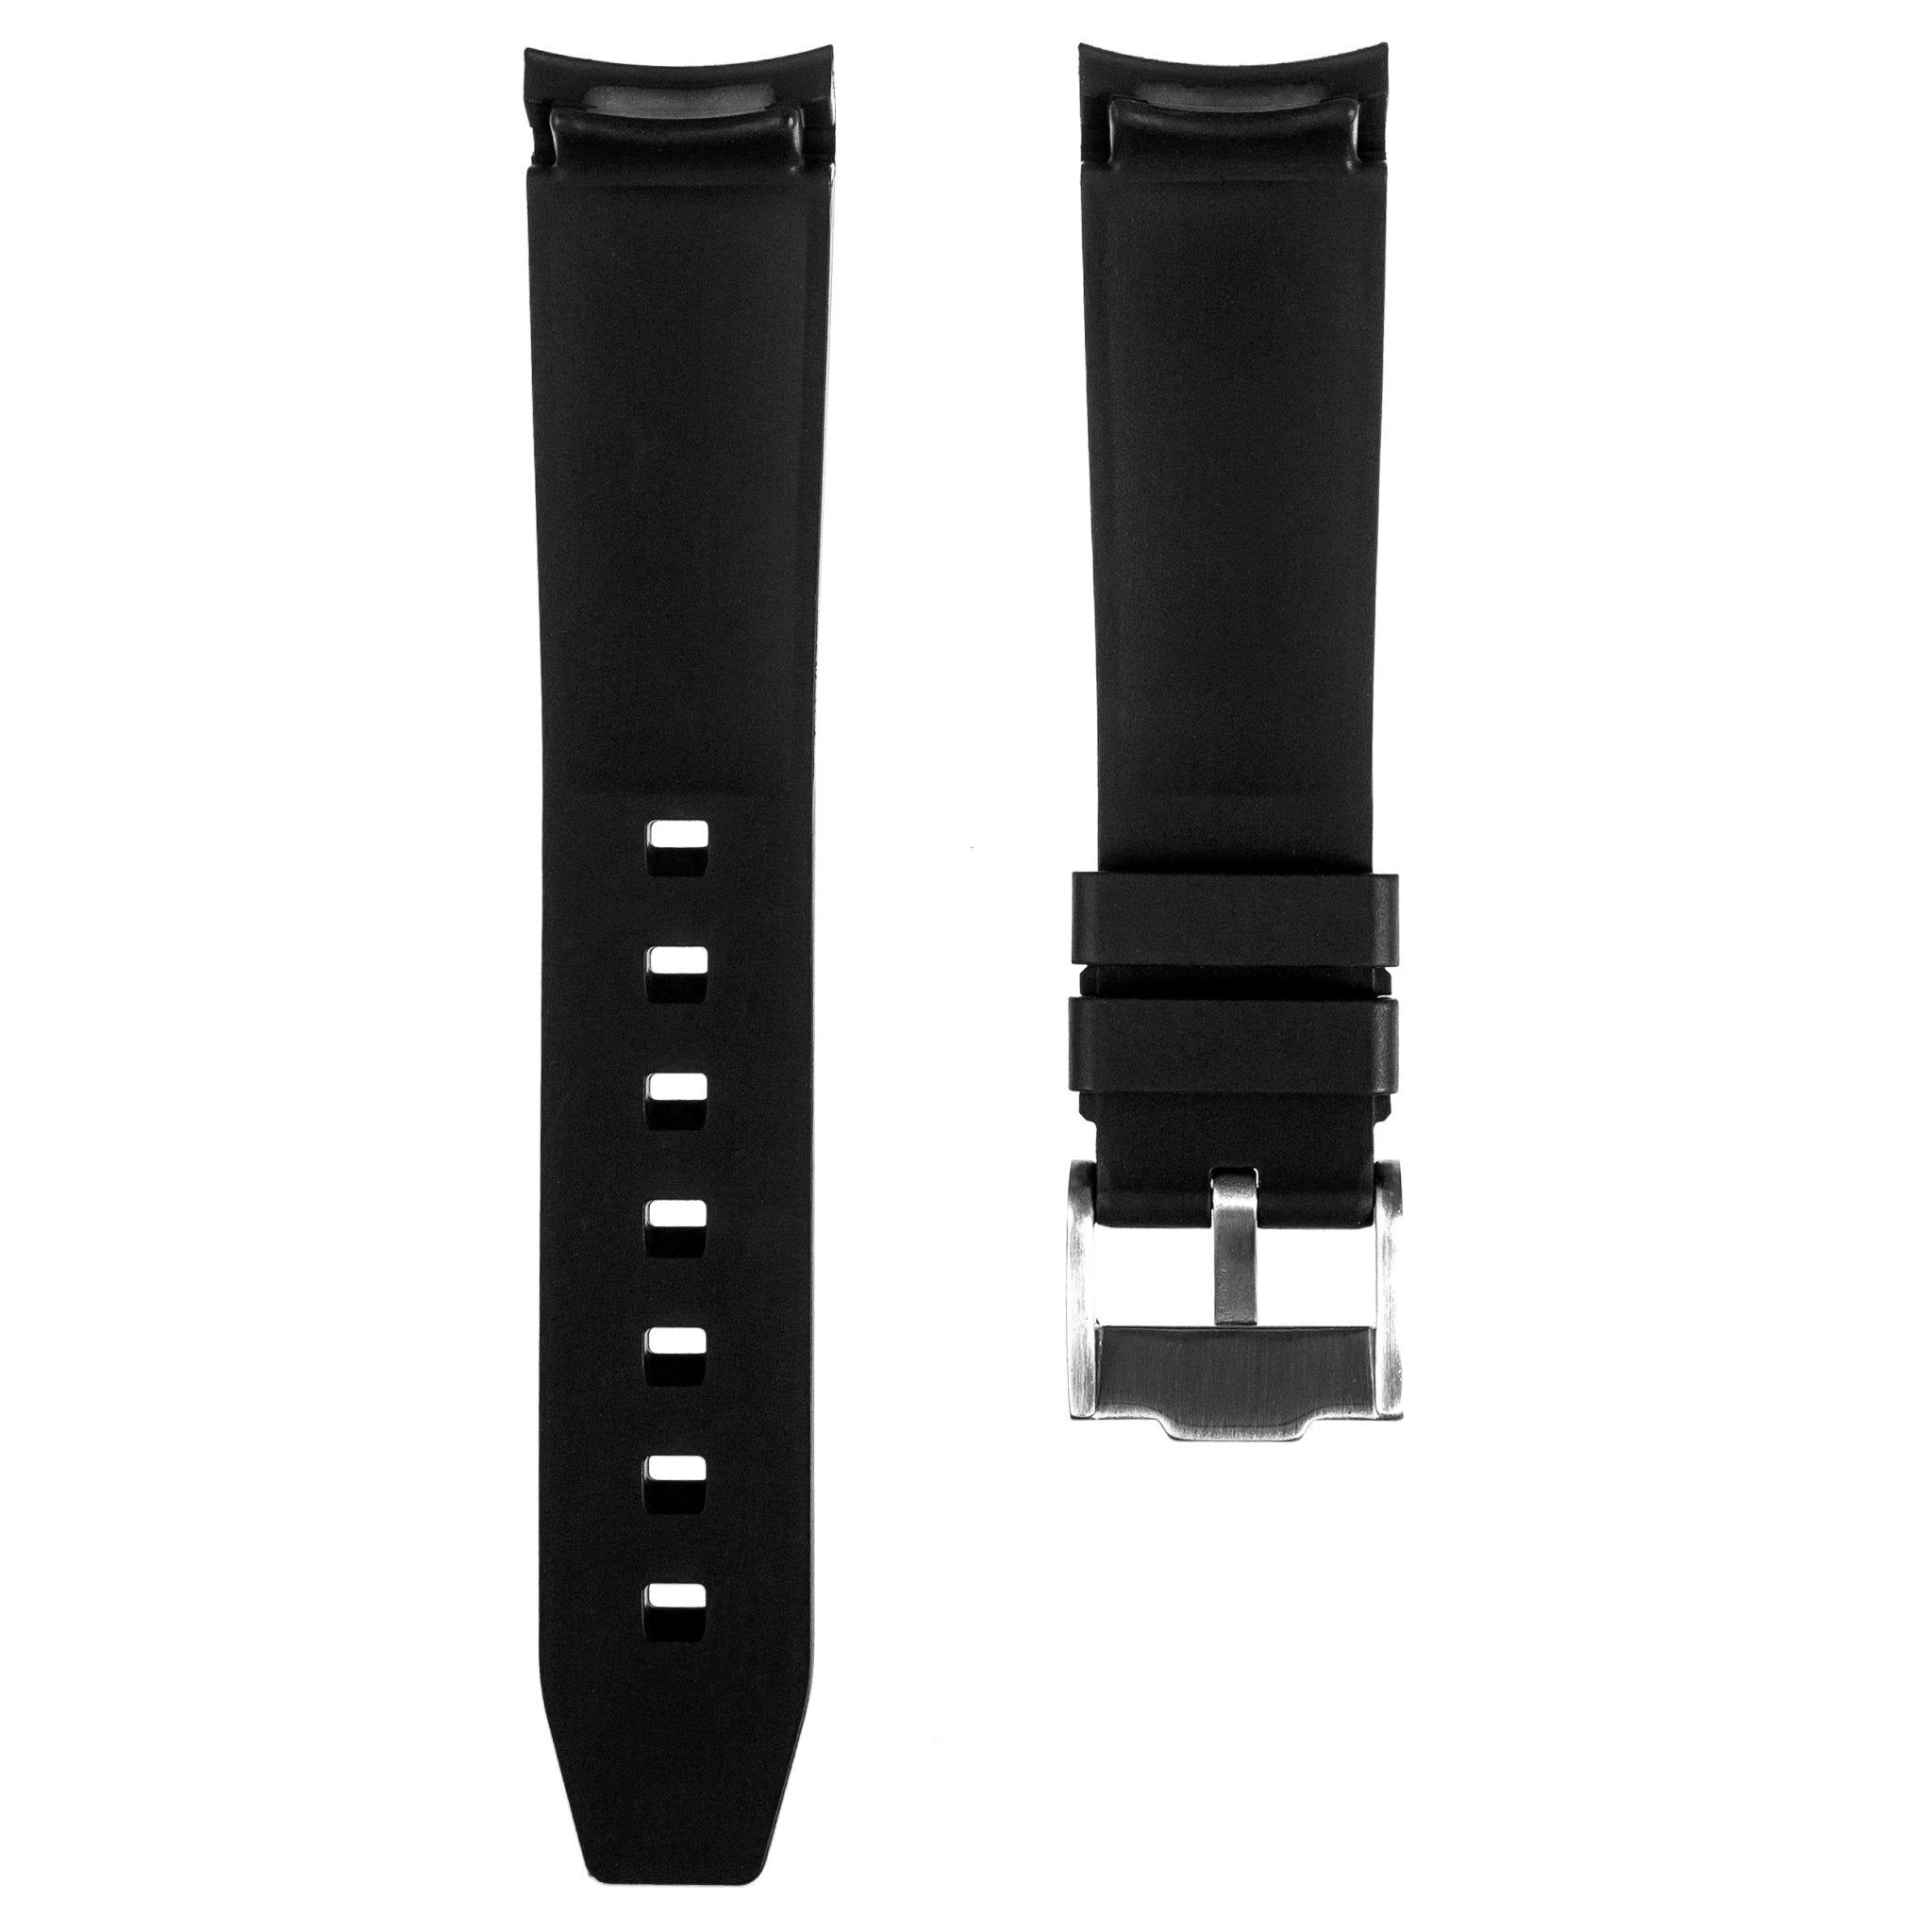 Forge Curved End FKM Rubber Strap – Compatible with Rolex Submariner – Black (2421) -Strapseeker